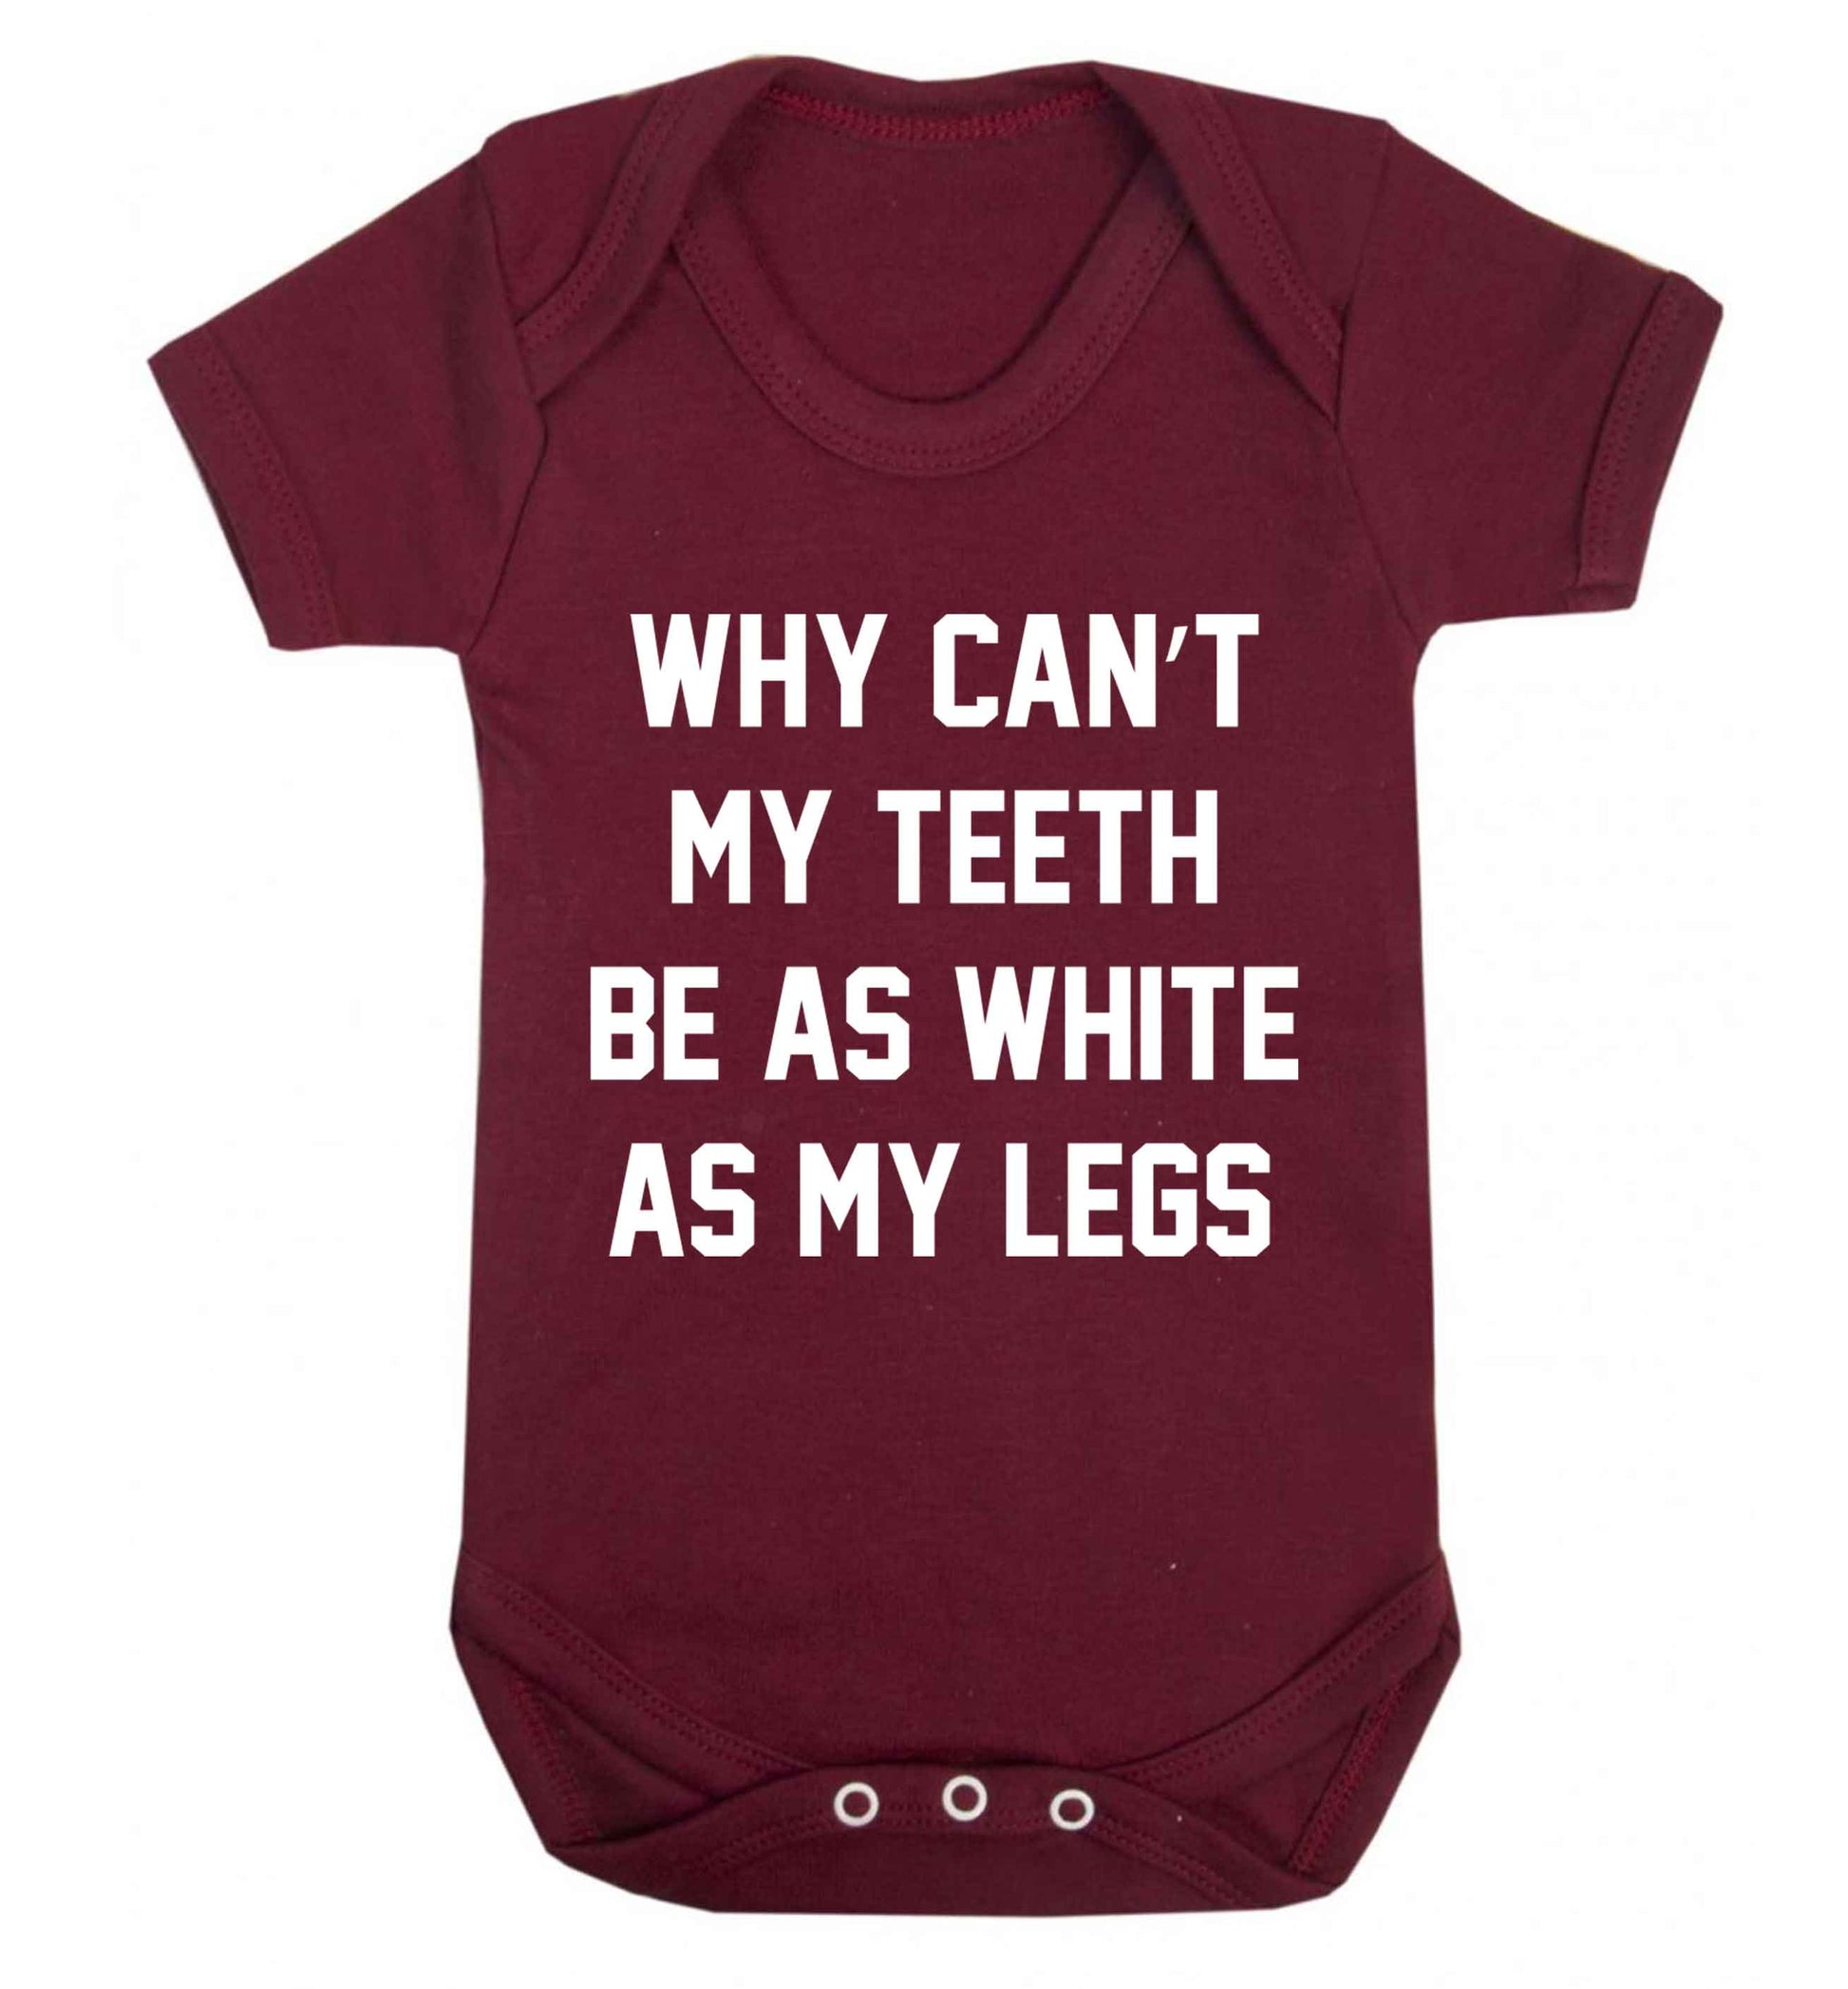 Why can't my teeth be as white as my legs Baby Vest maroon 18-24 months